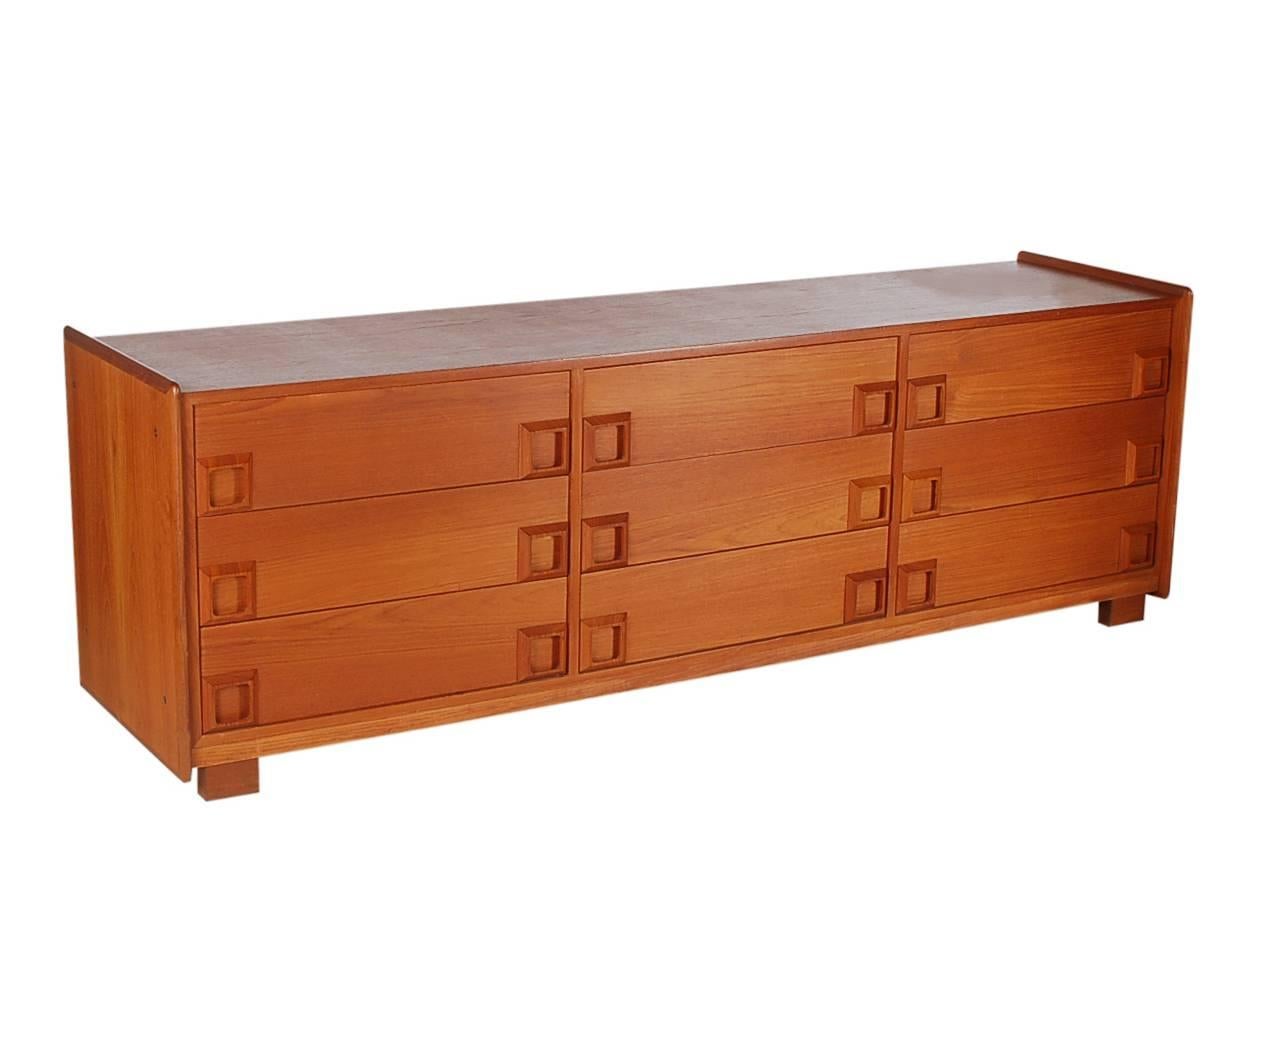 A sleek low profile nine-drawer teak dresser in the manner of John Stuart. It features teak construction and square recessed pulls.